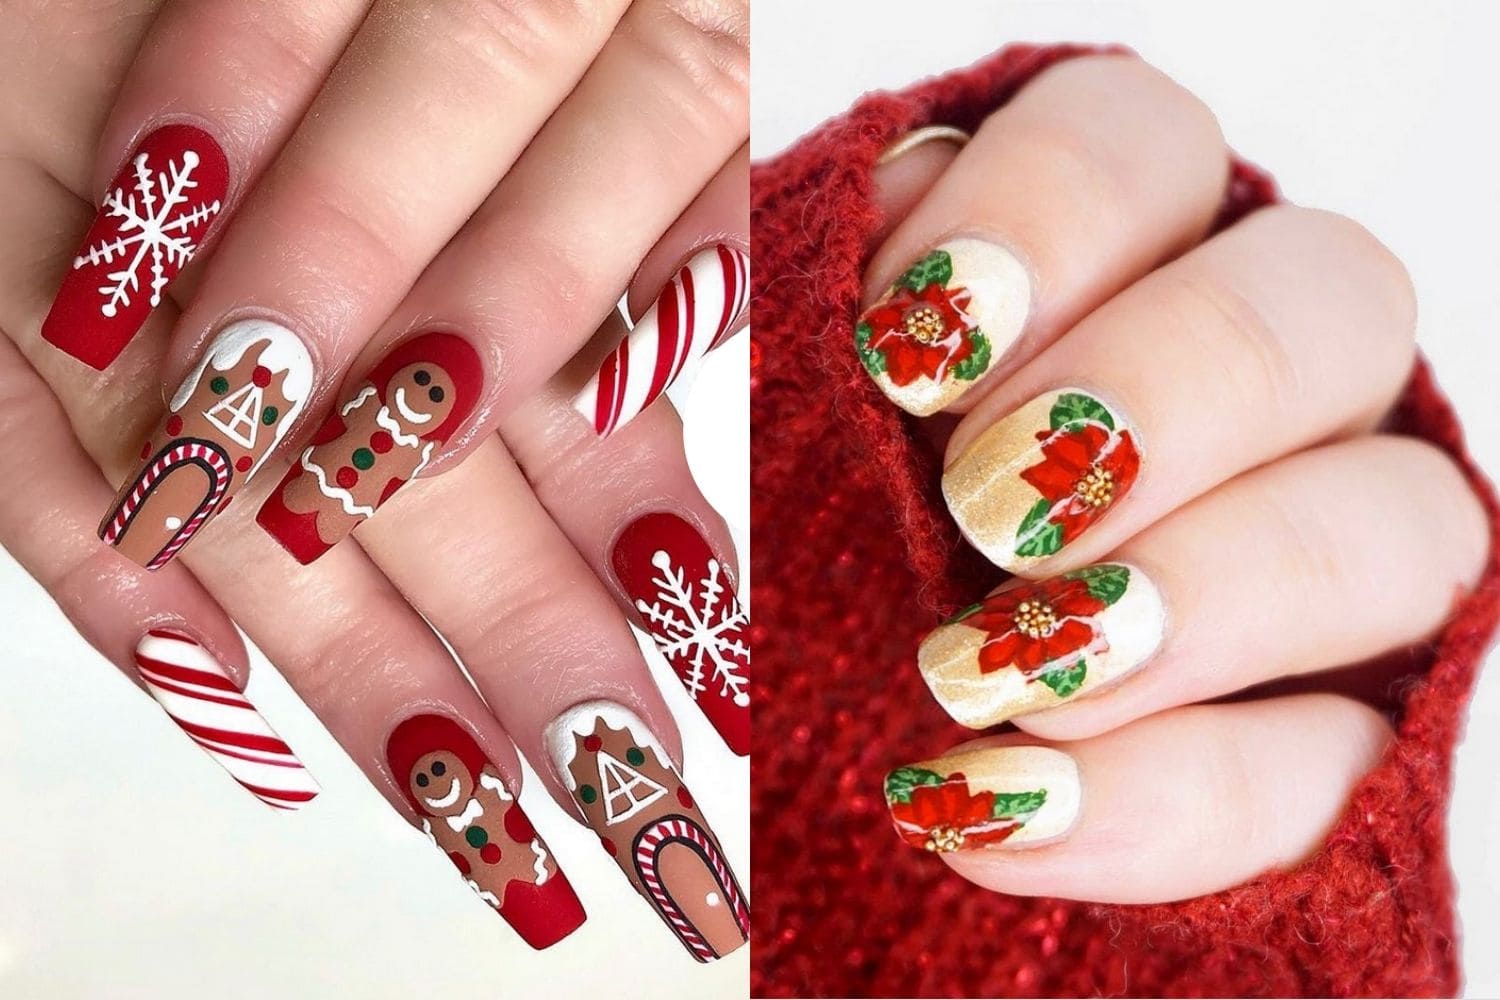 21 Christmas Nail Designs to Spread the Holiday Cheer | Darcy